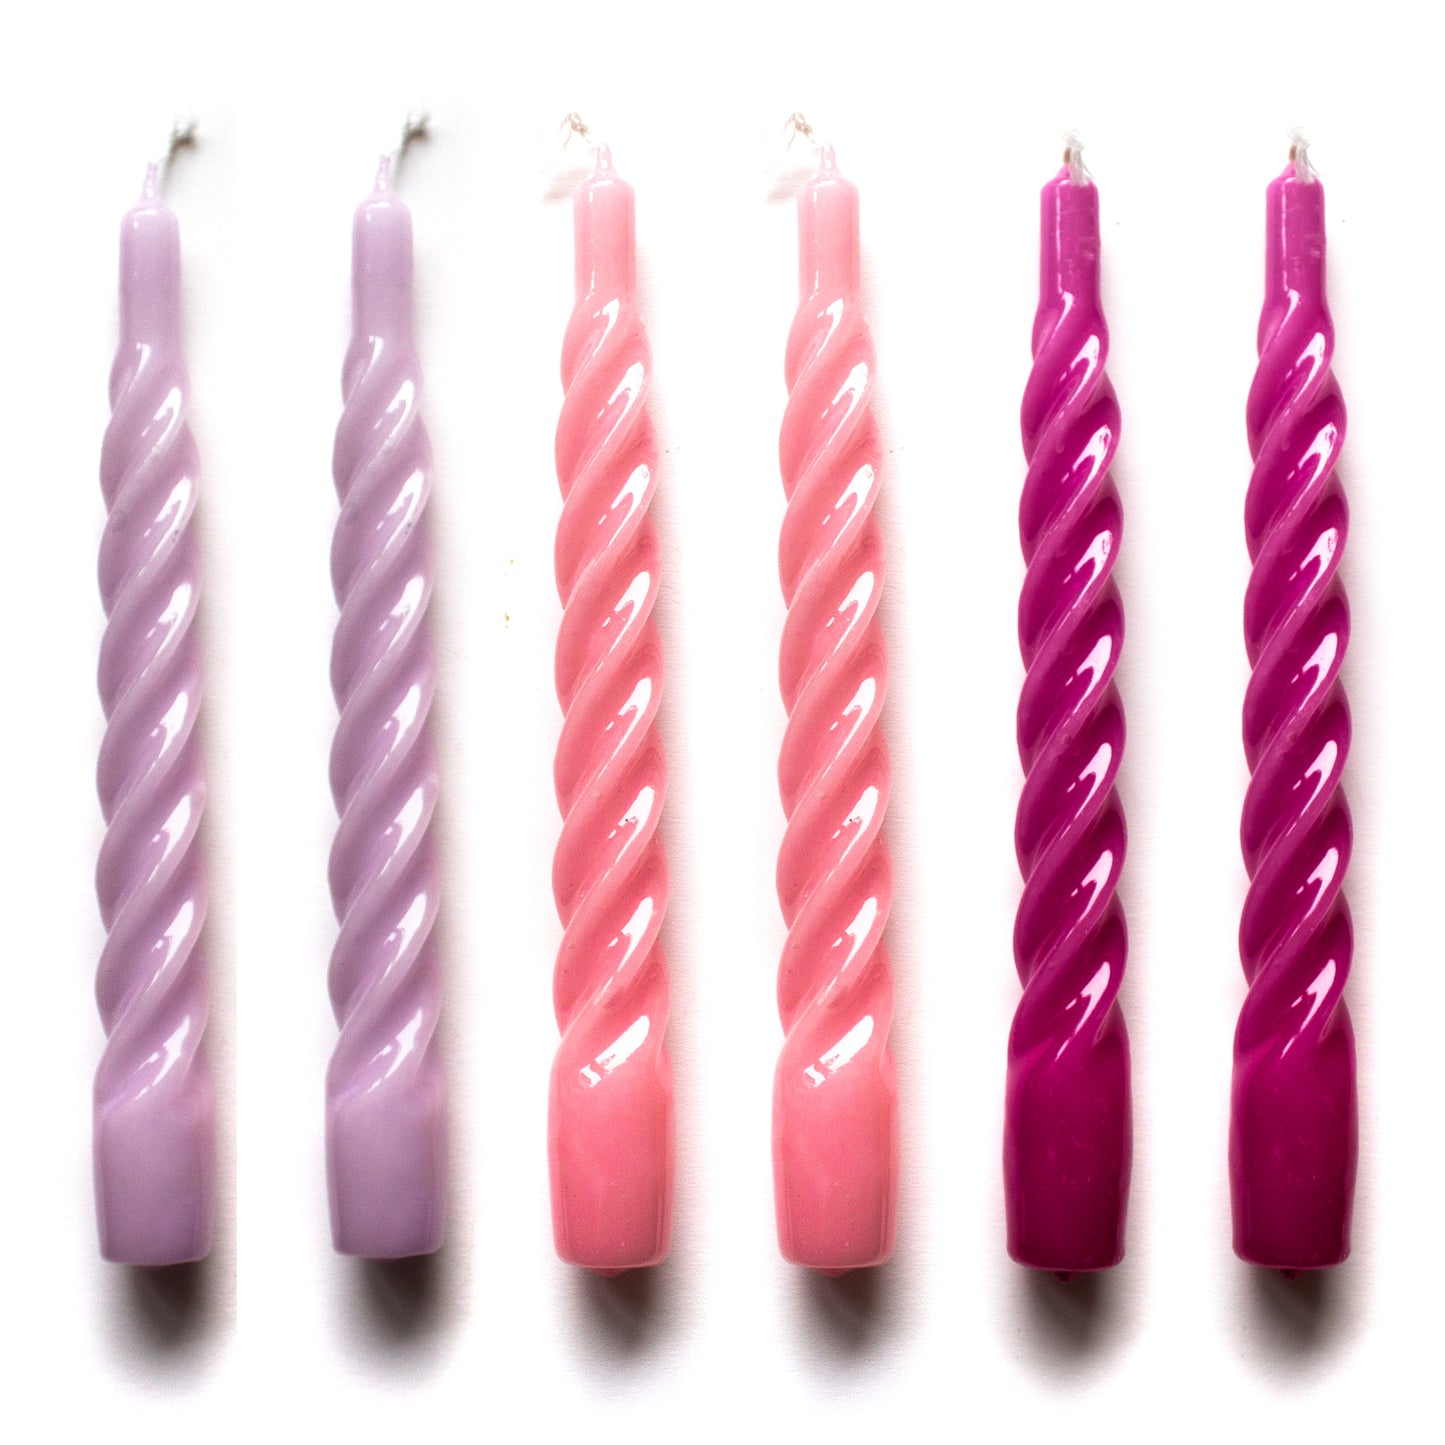 6 TWISTED CANDLES - choose colors